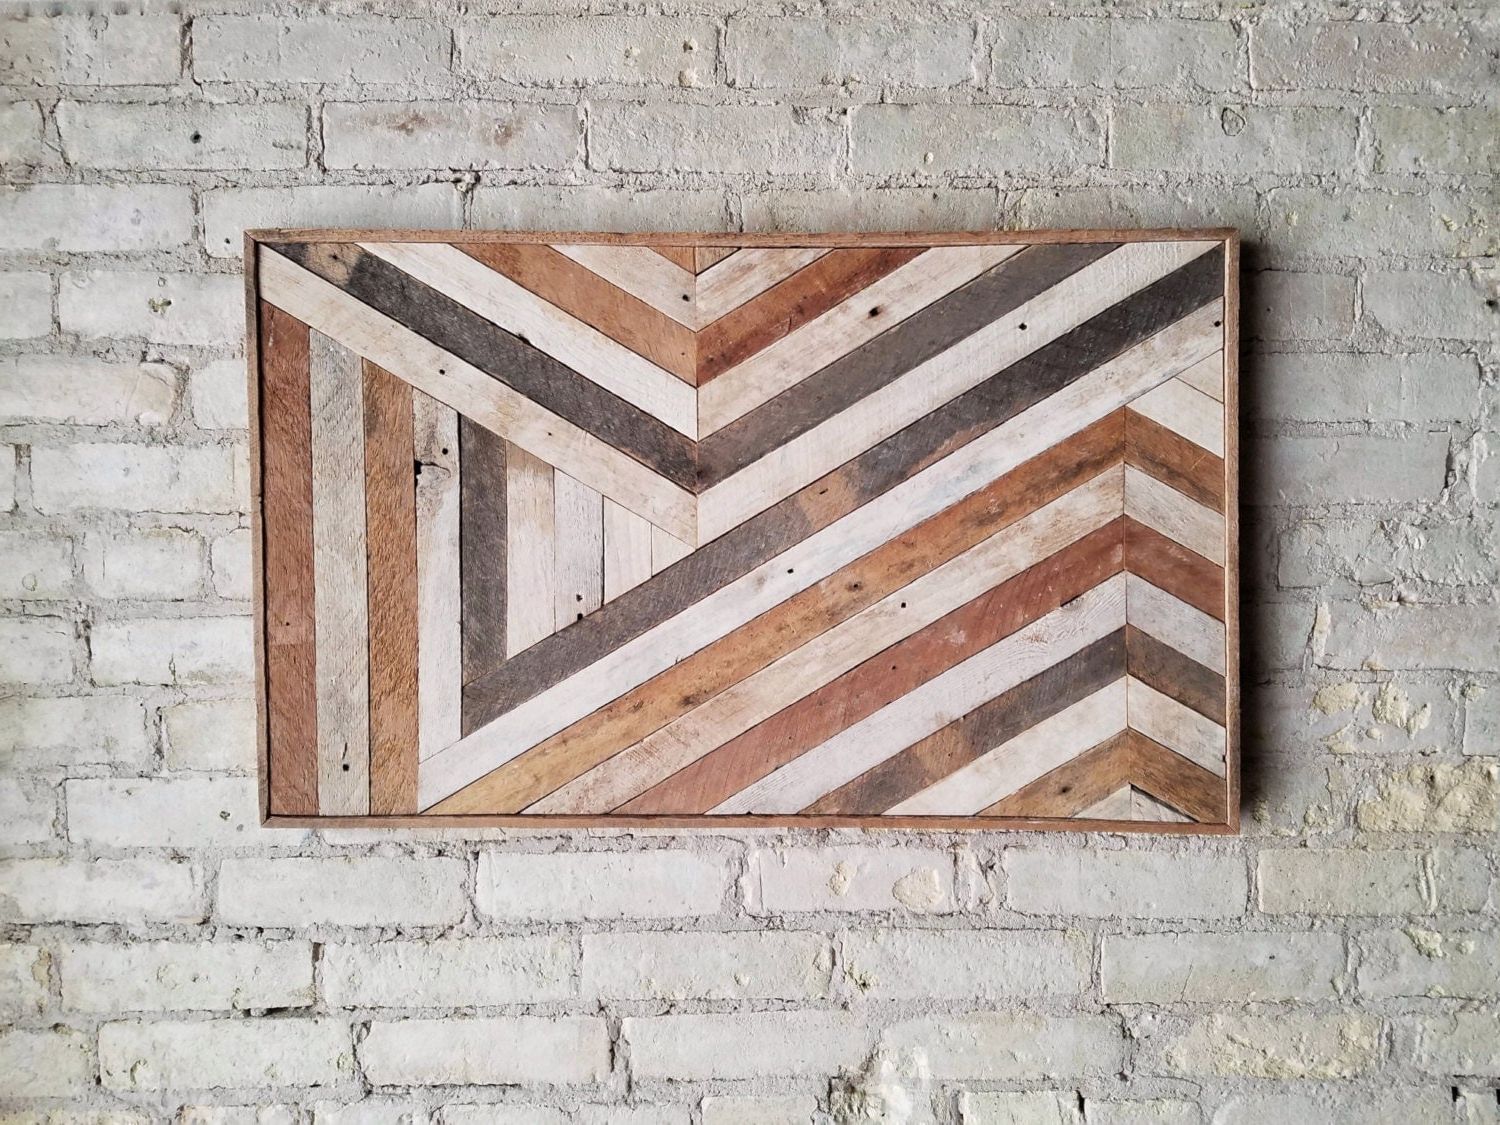 Most Recent Abstract Wood Wall Art Intended For Reclaimed Wood Wall Art, Wall Decor, Abstract Chevron (View 5 of 20)